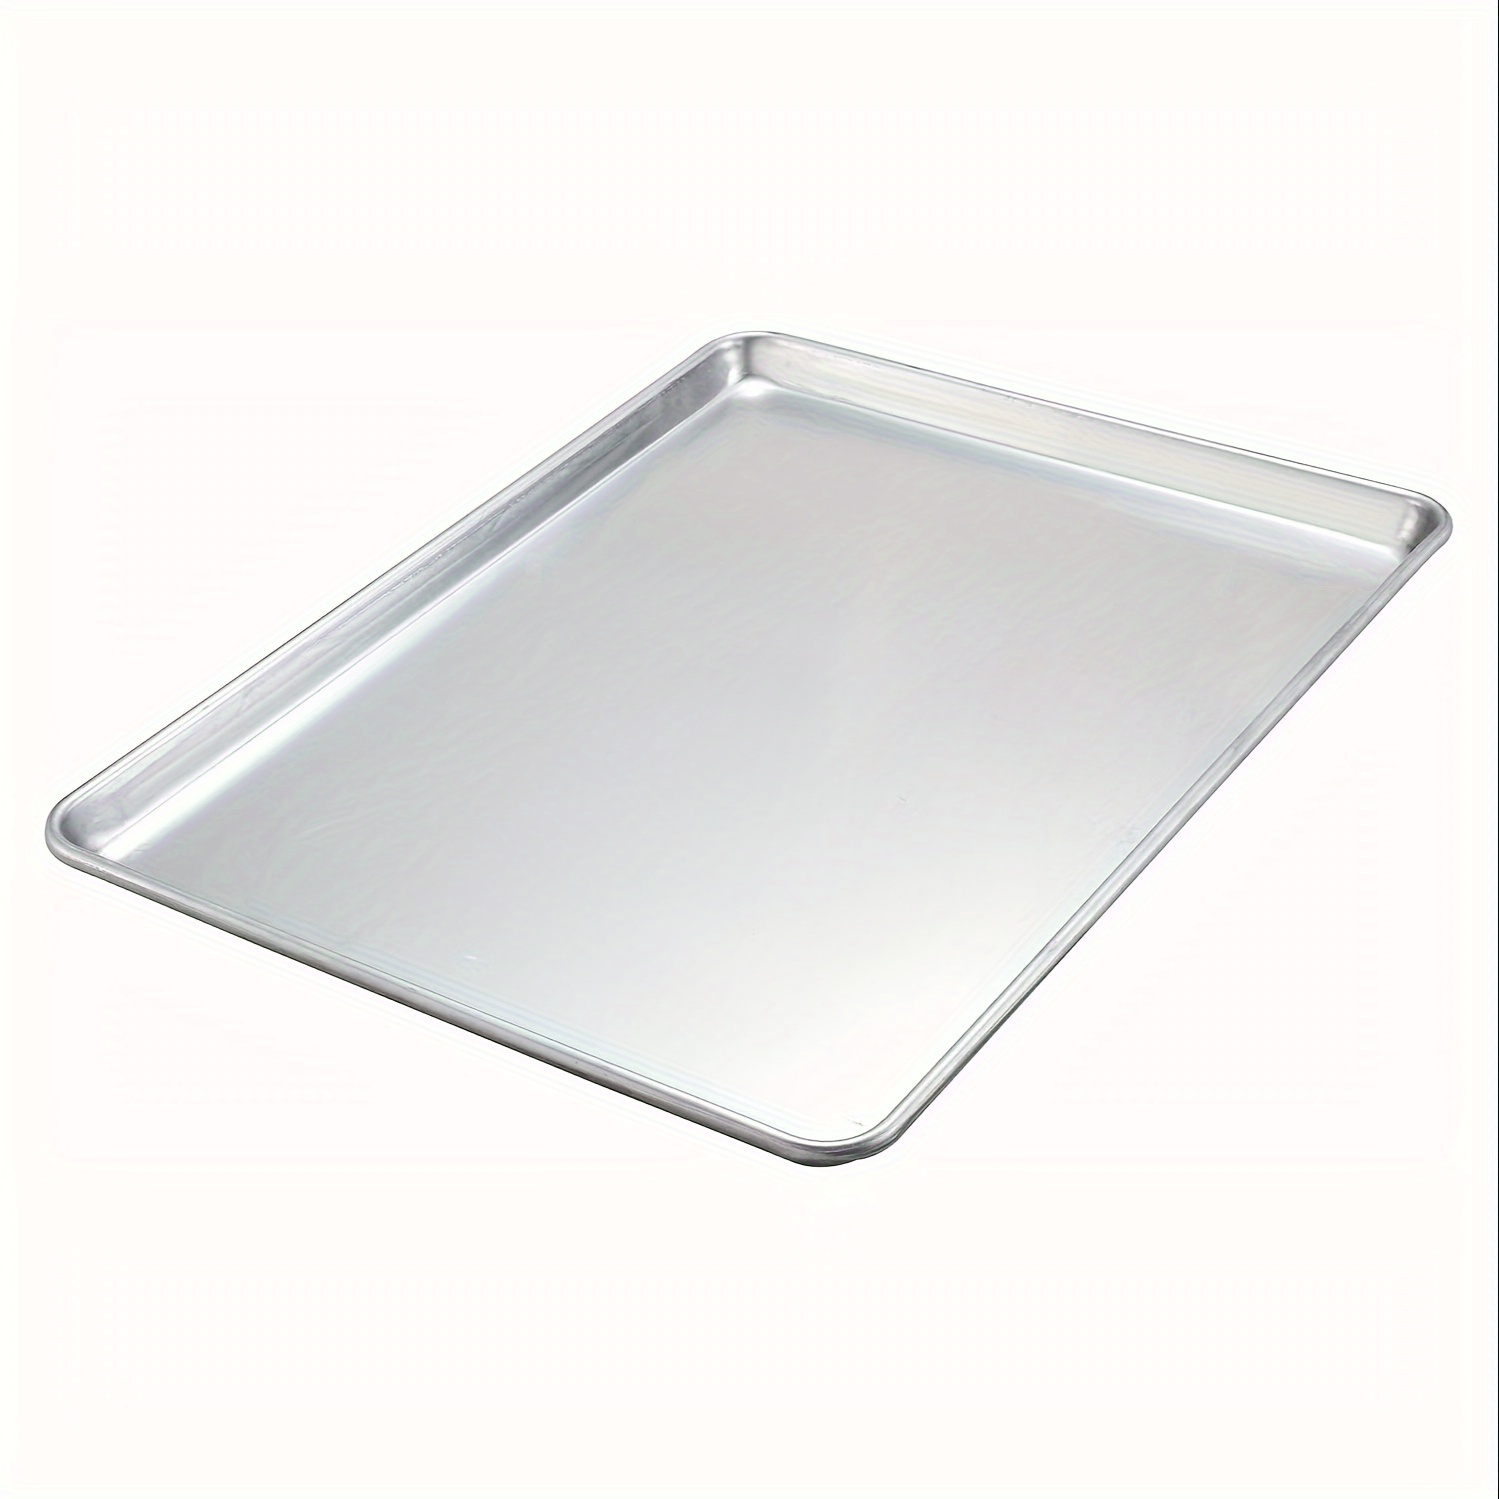 

1pc, Baking Sheet, 18''x13'', Aluminum Baking Pan, Non-stick Cookie Sheet, Grilling Trays, Oven Accessories, Baking Tools, Kitchen Gadgets, Kitchen Accessories